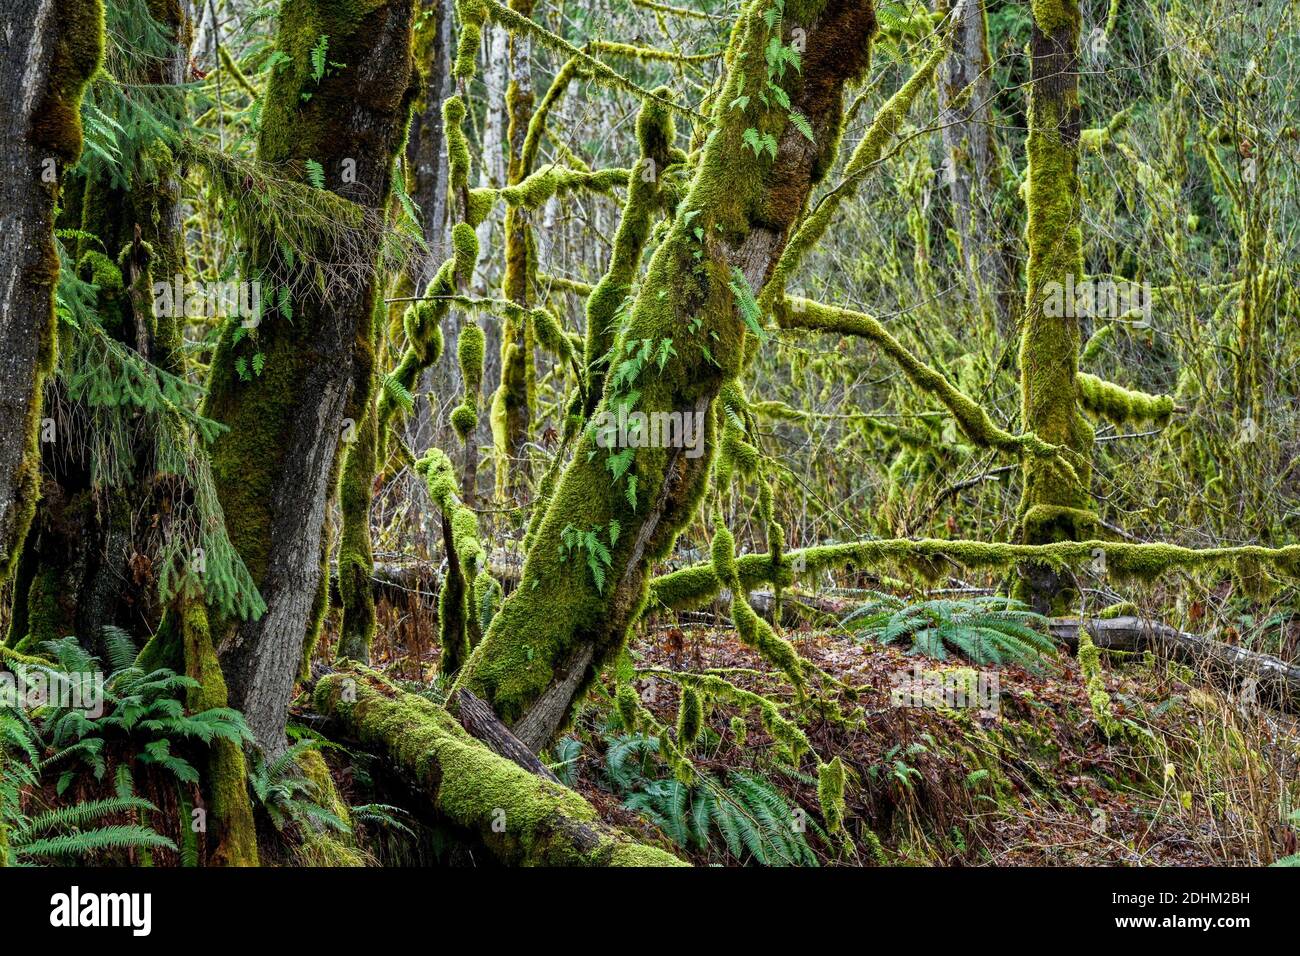 Moss Covered Big Leaf Maple Tree Branches, Squamish River Valley, British Columbia, Canada Foto Stock